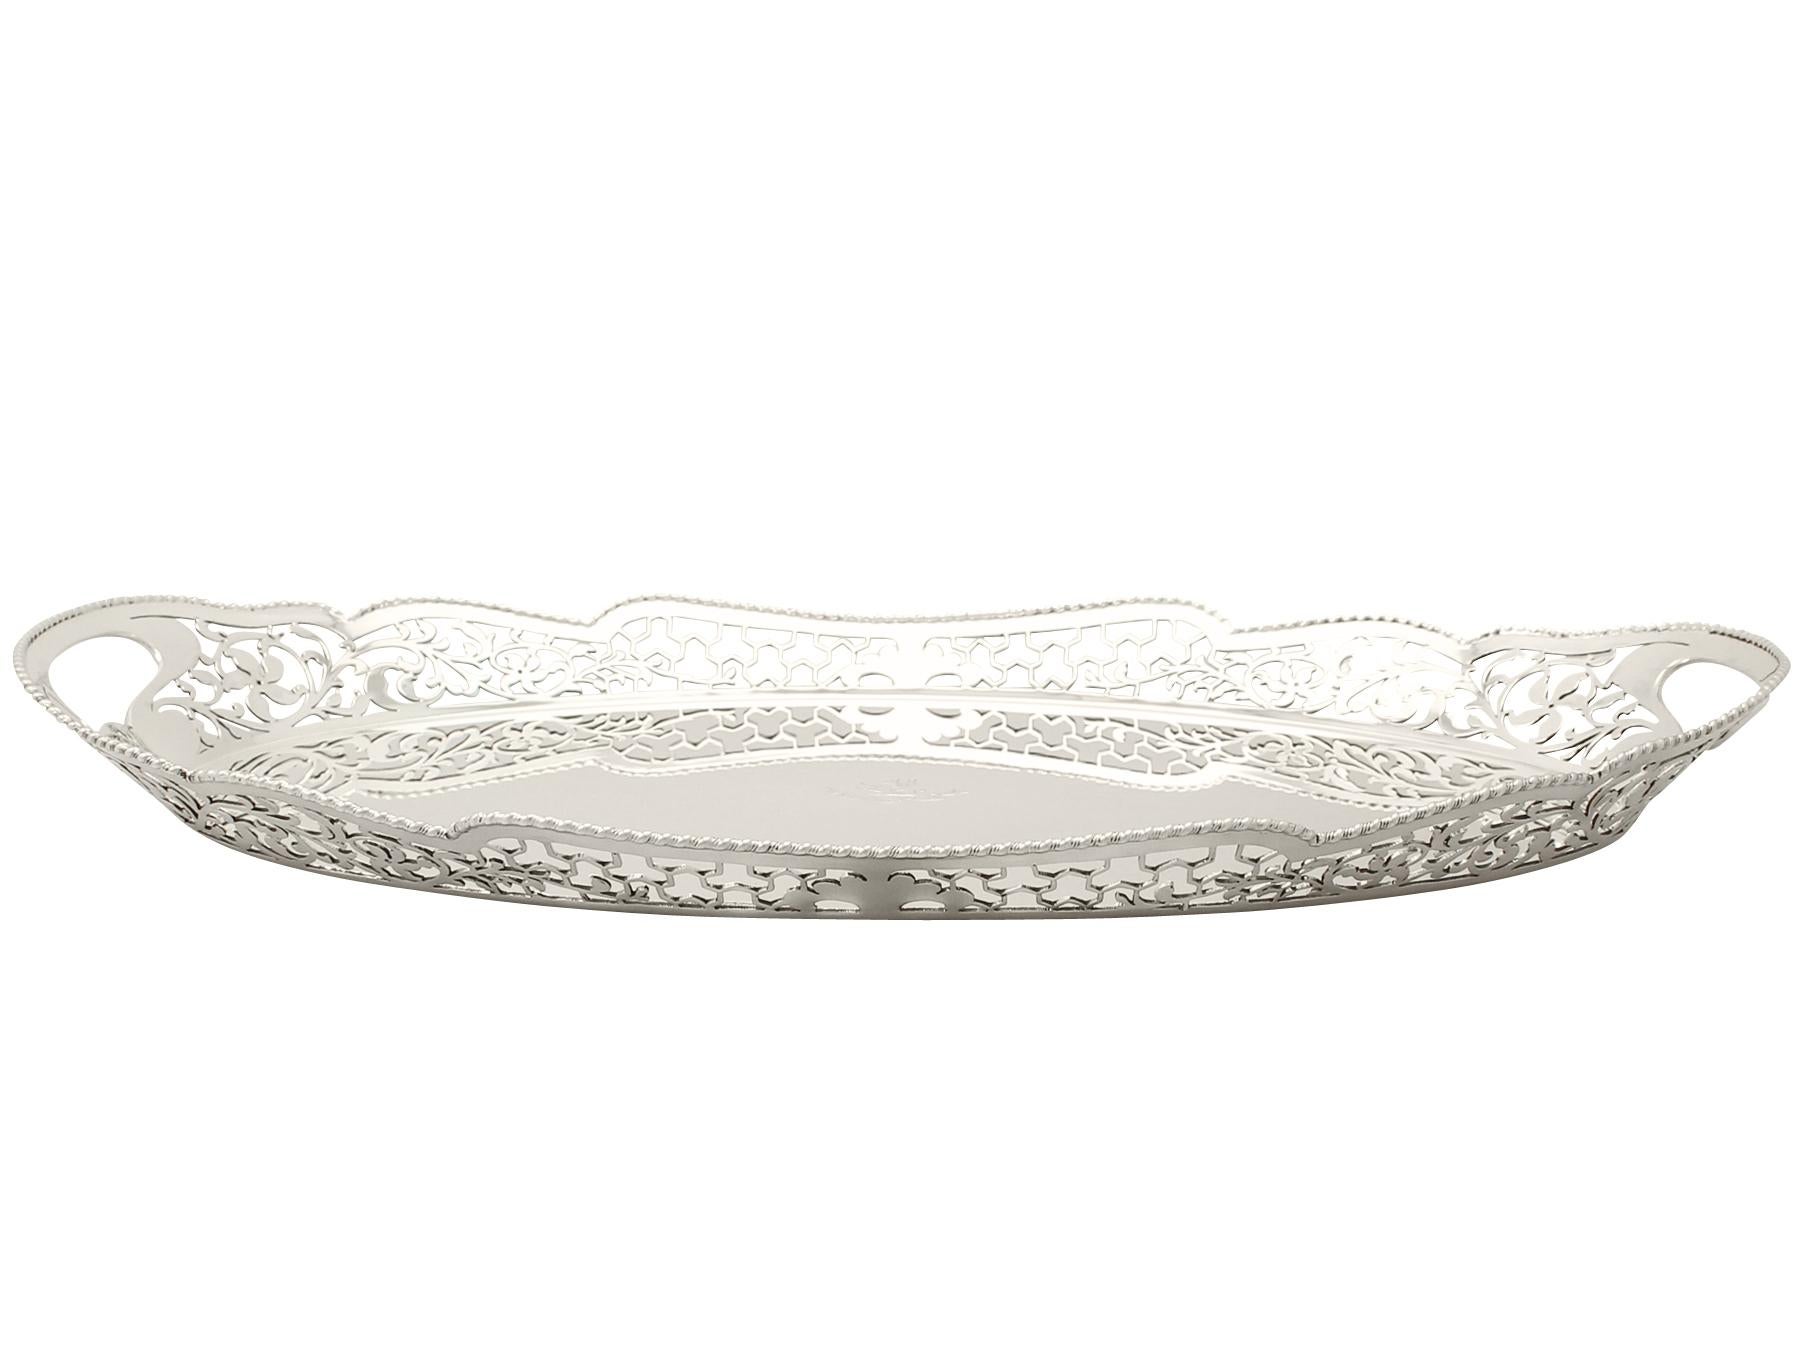 An exceptional, fine and impressive antique Edwardian English sterling silver gallery tray; an addition to our dining silverware collection.

This exceptional antique Edwardian sterling silver gallery tray has a plain oval form.

The surface of